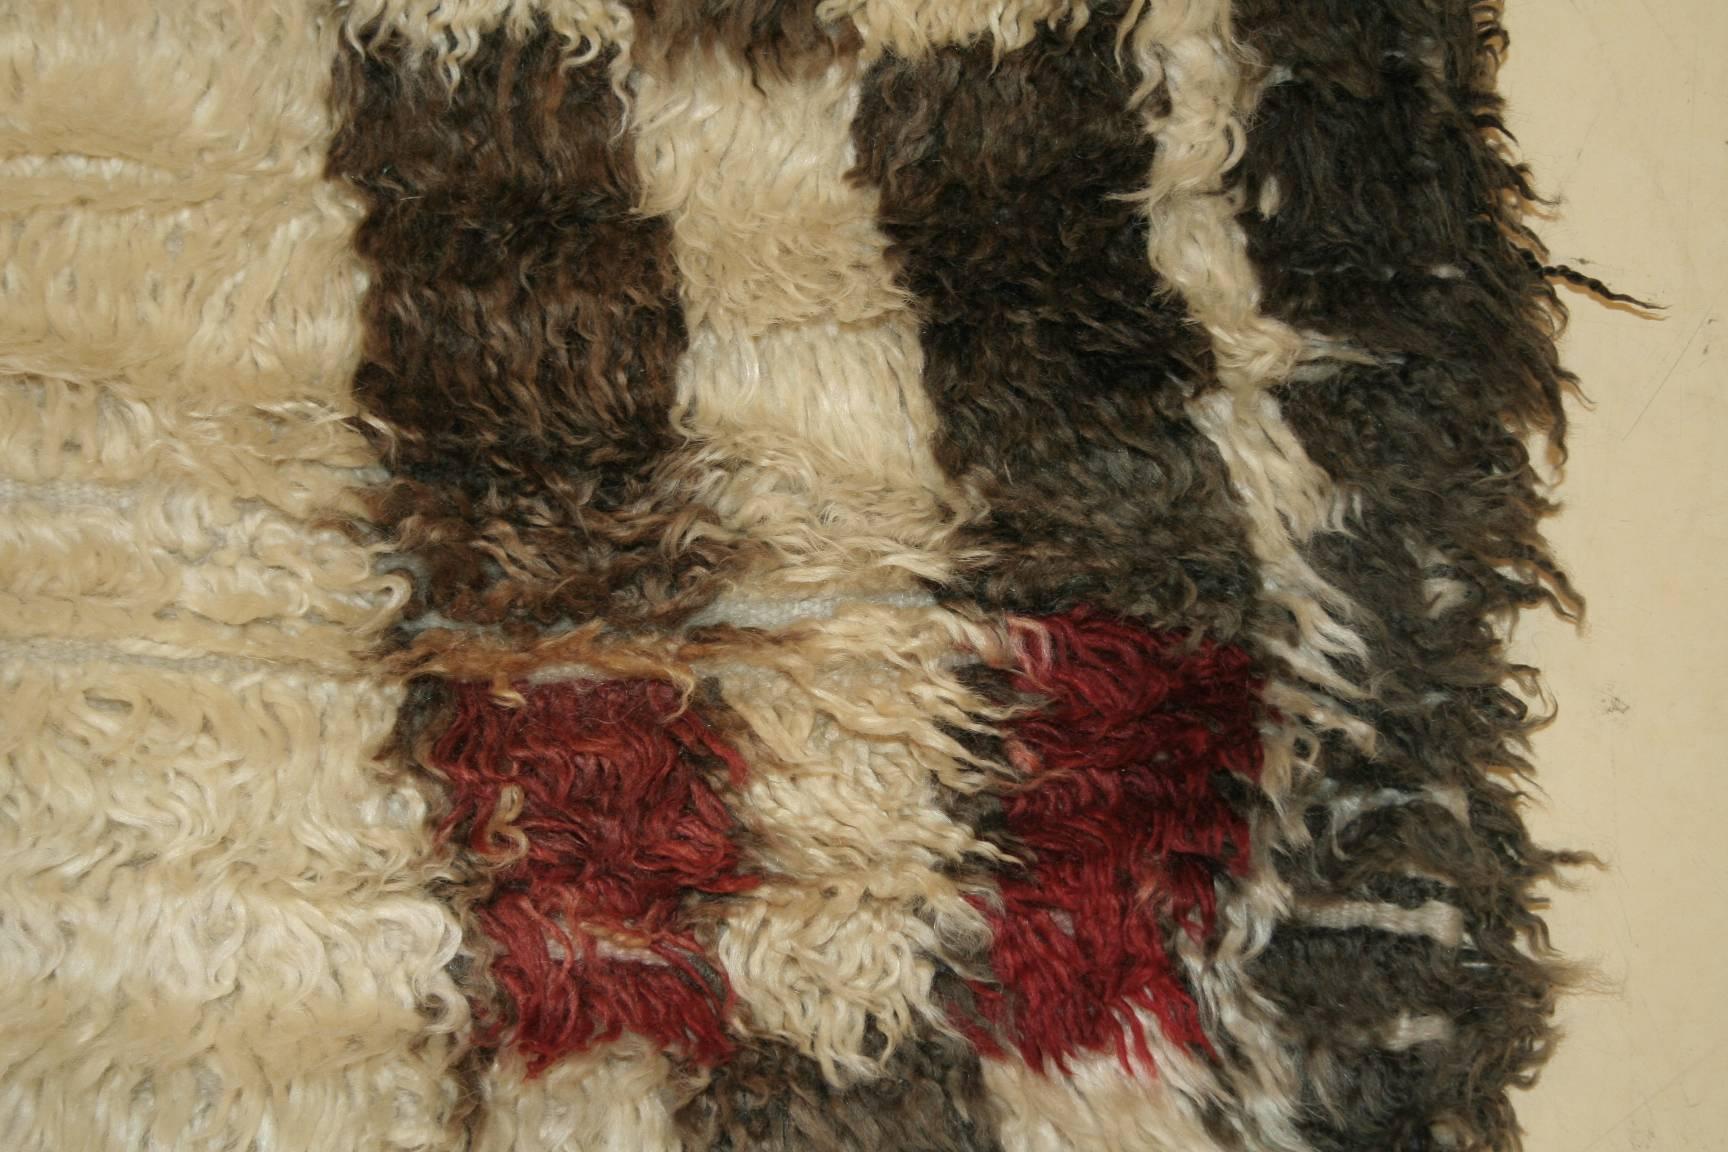 The Beni Ouarain confederation is composed of seventeen tribes inhabiting the high mountain region of the northeastern Middle Atlas. Their rugs differ from other Berber weavings in that they are woven almost exclusively on an ivory background and